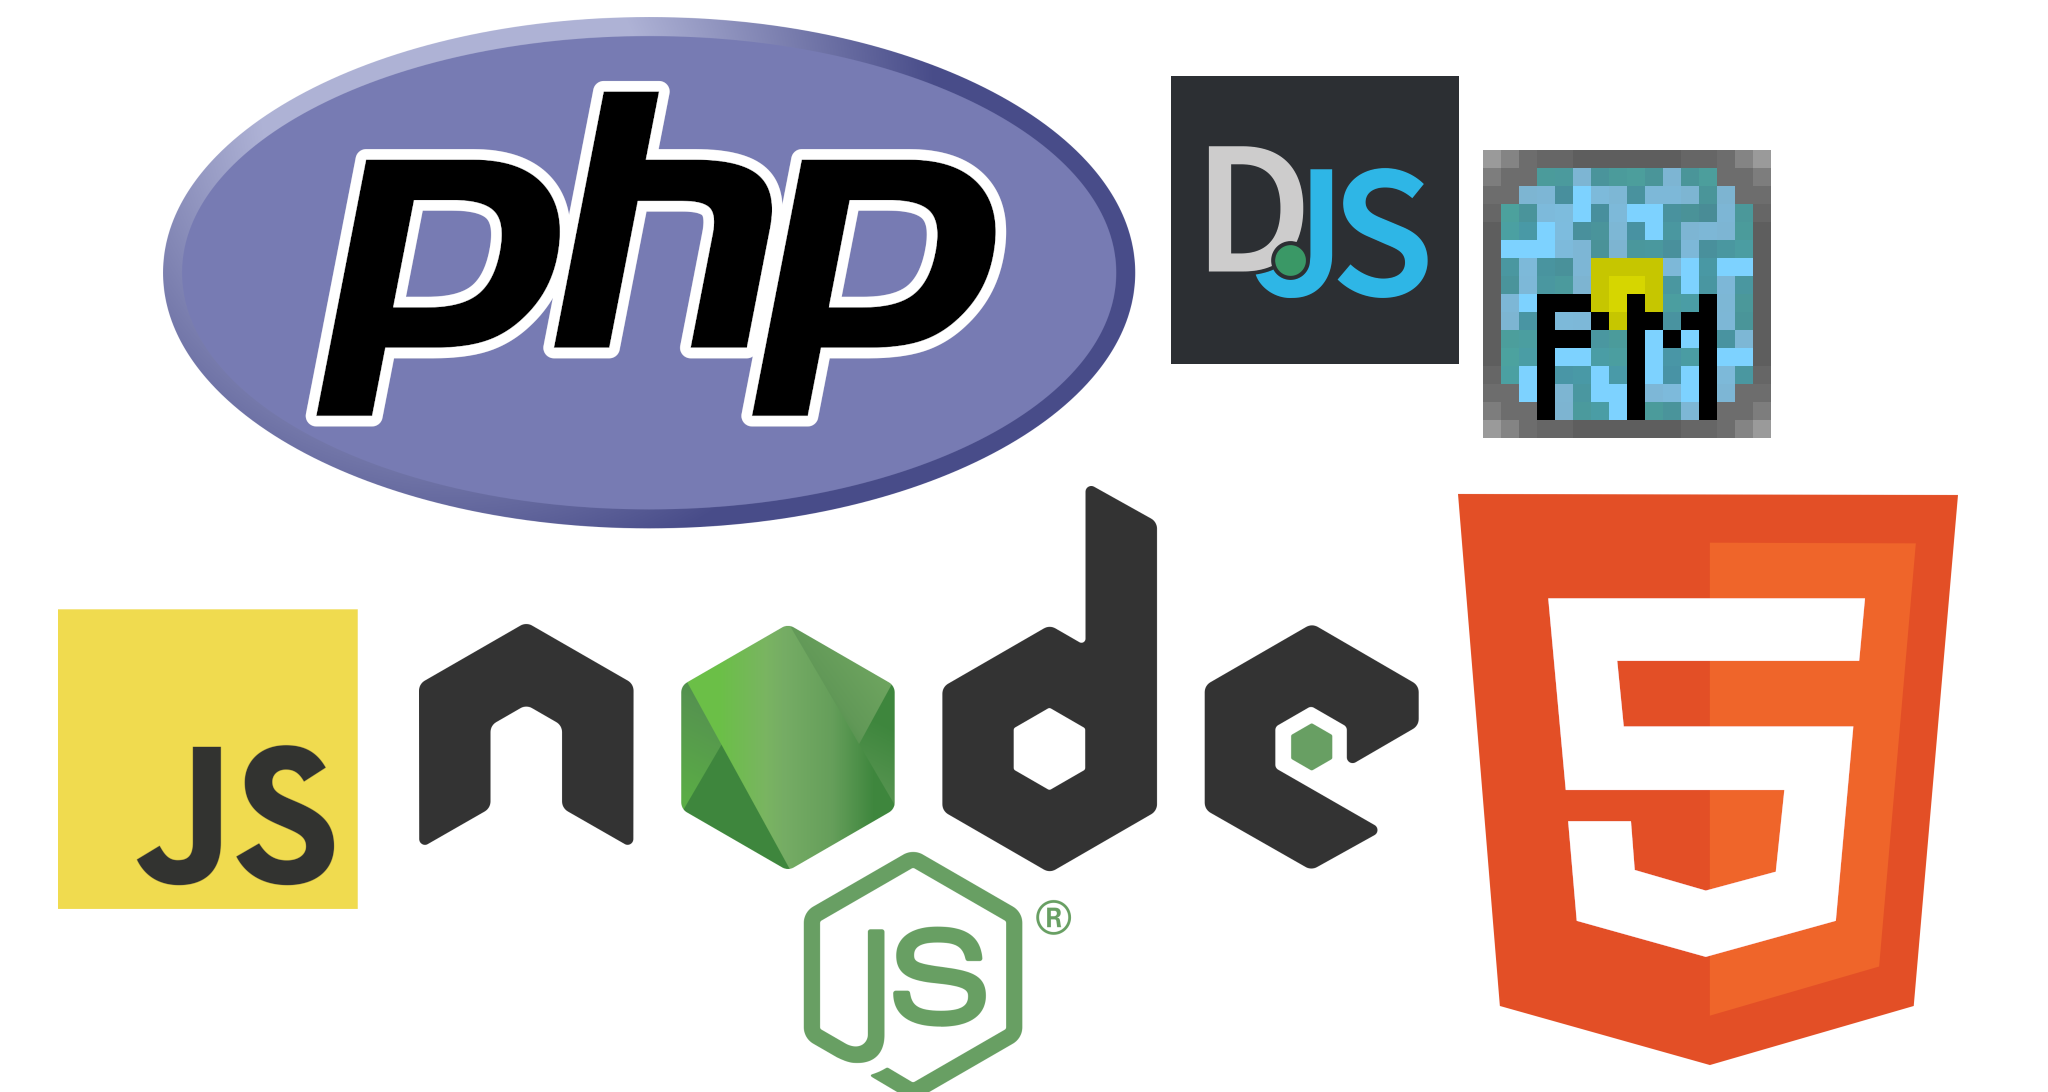 Logos of some of the technologies I have experience with (PHP, DJS, NodeJS, PocketMine-MP).